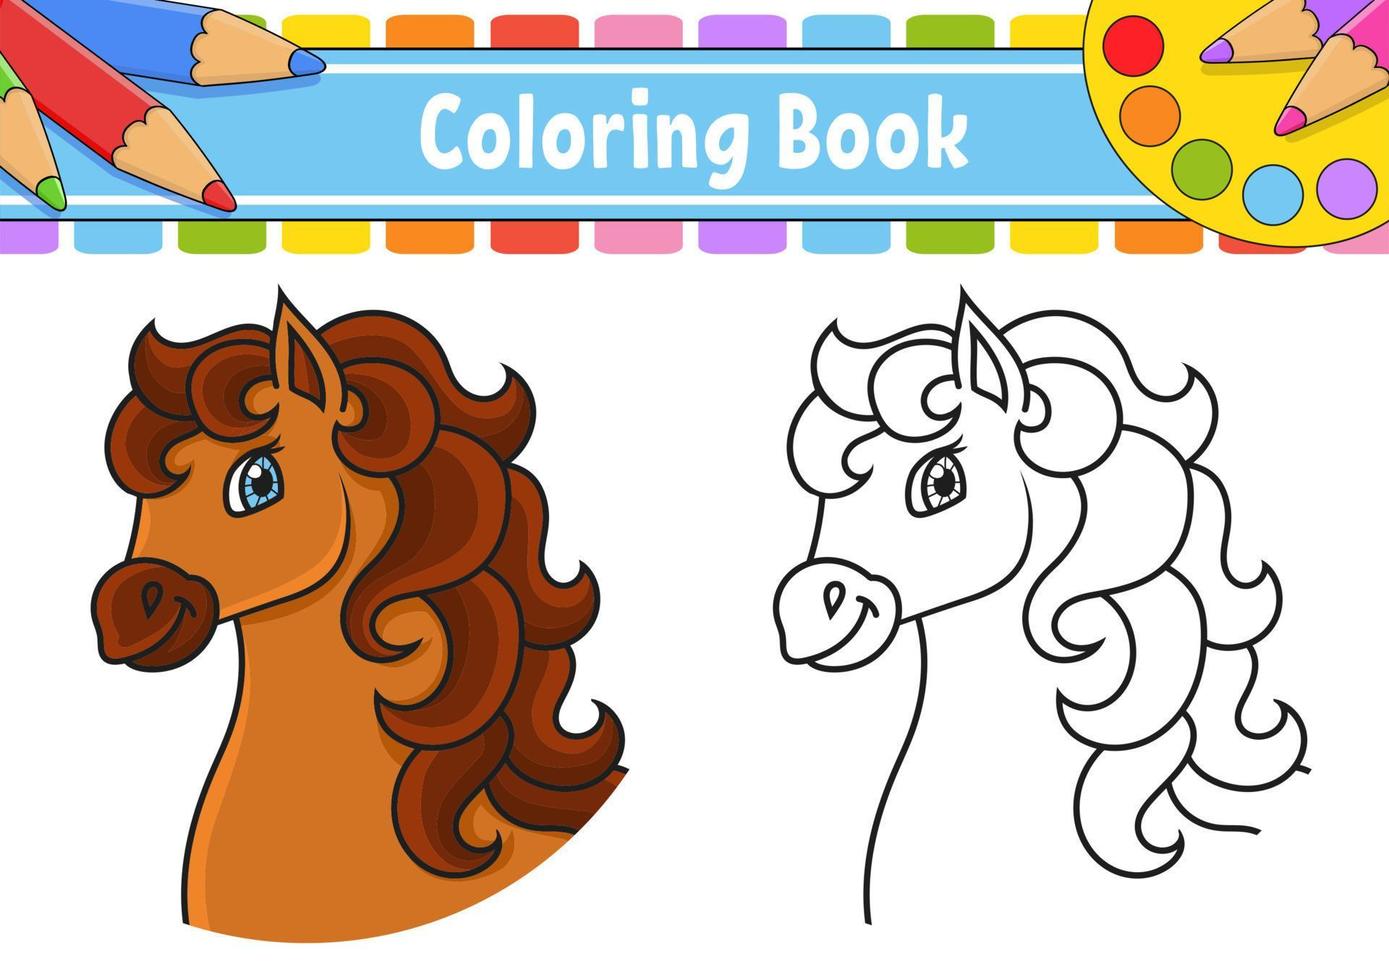 Coloring book for kids. Horse animal. Coon character. Vector illustration. Black contour. Isolated on white background.